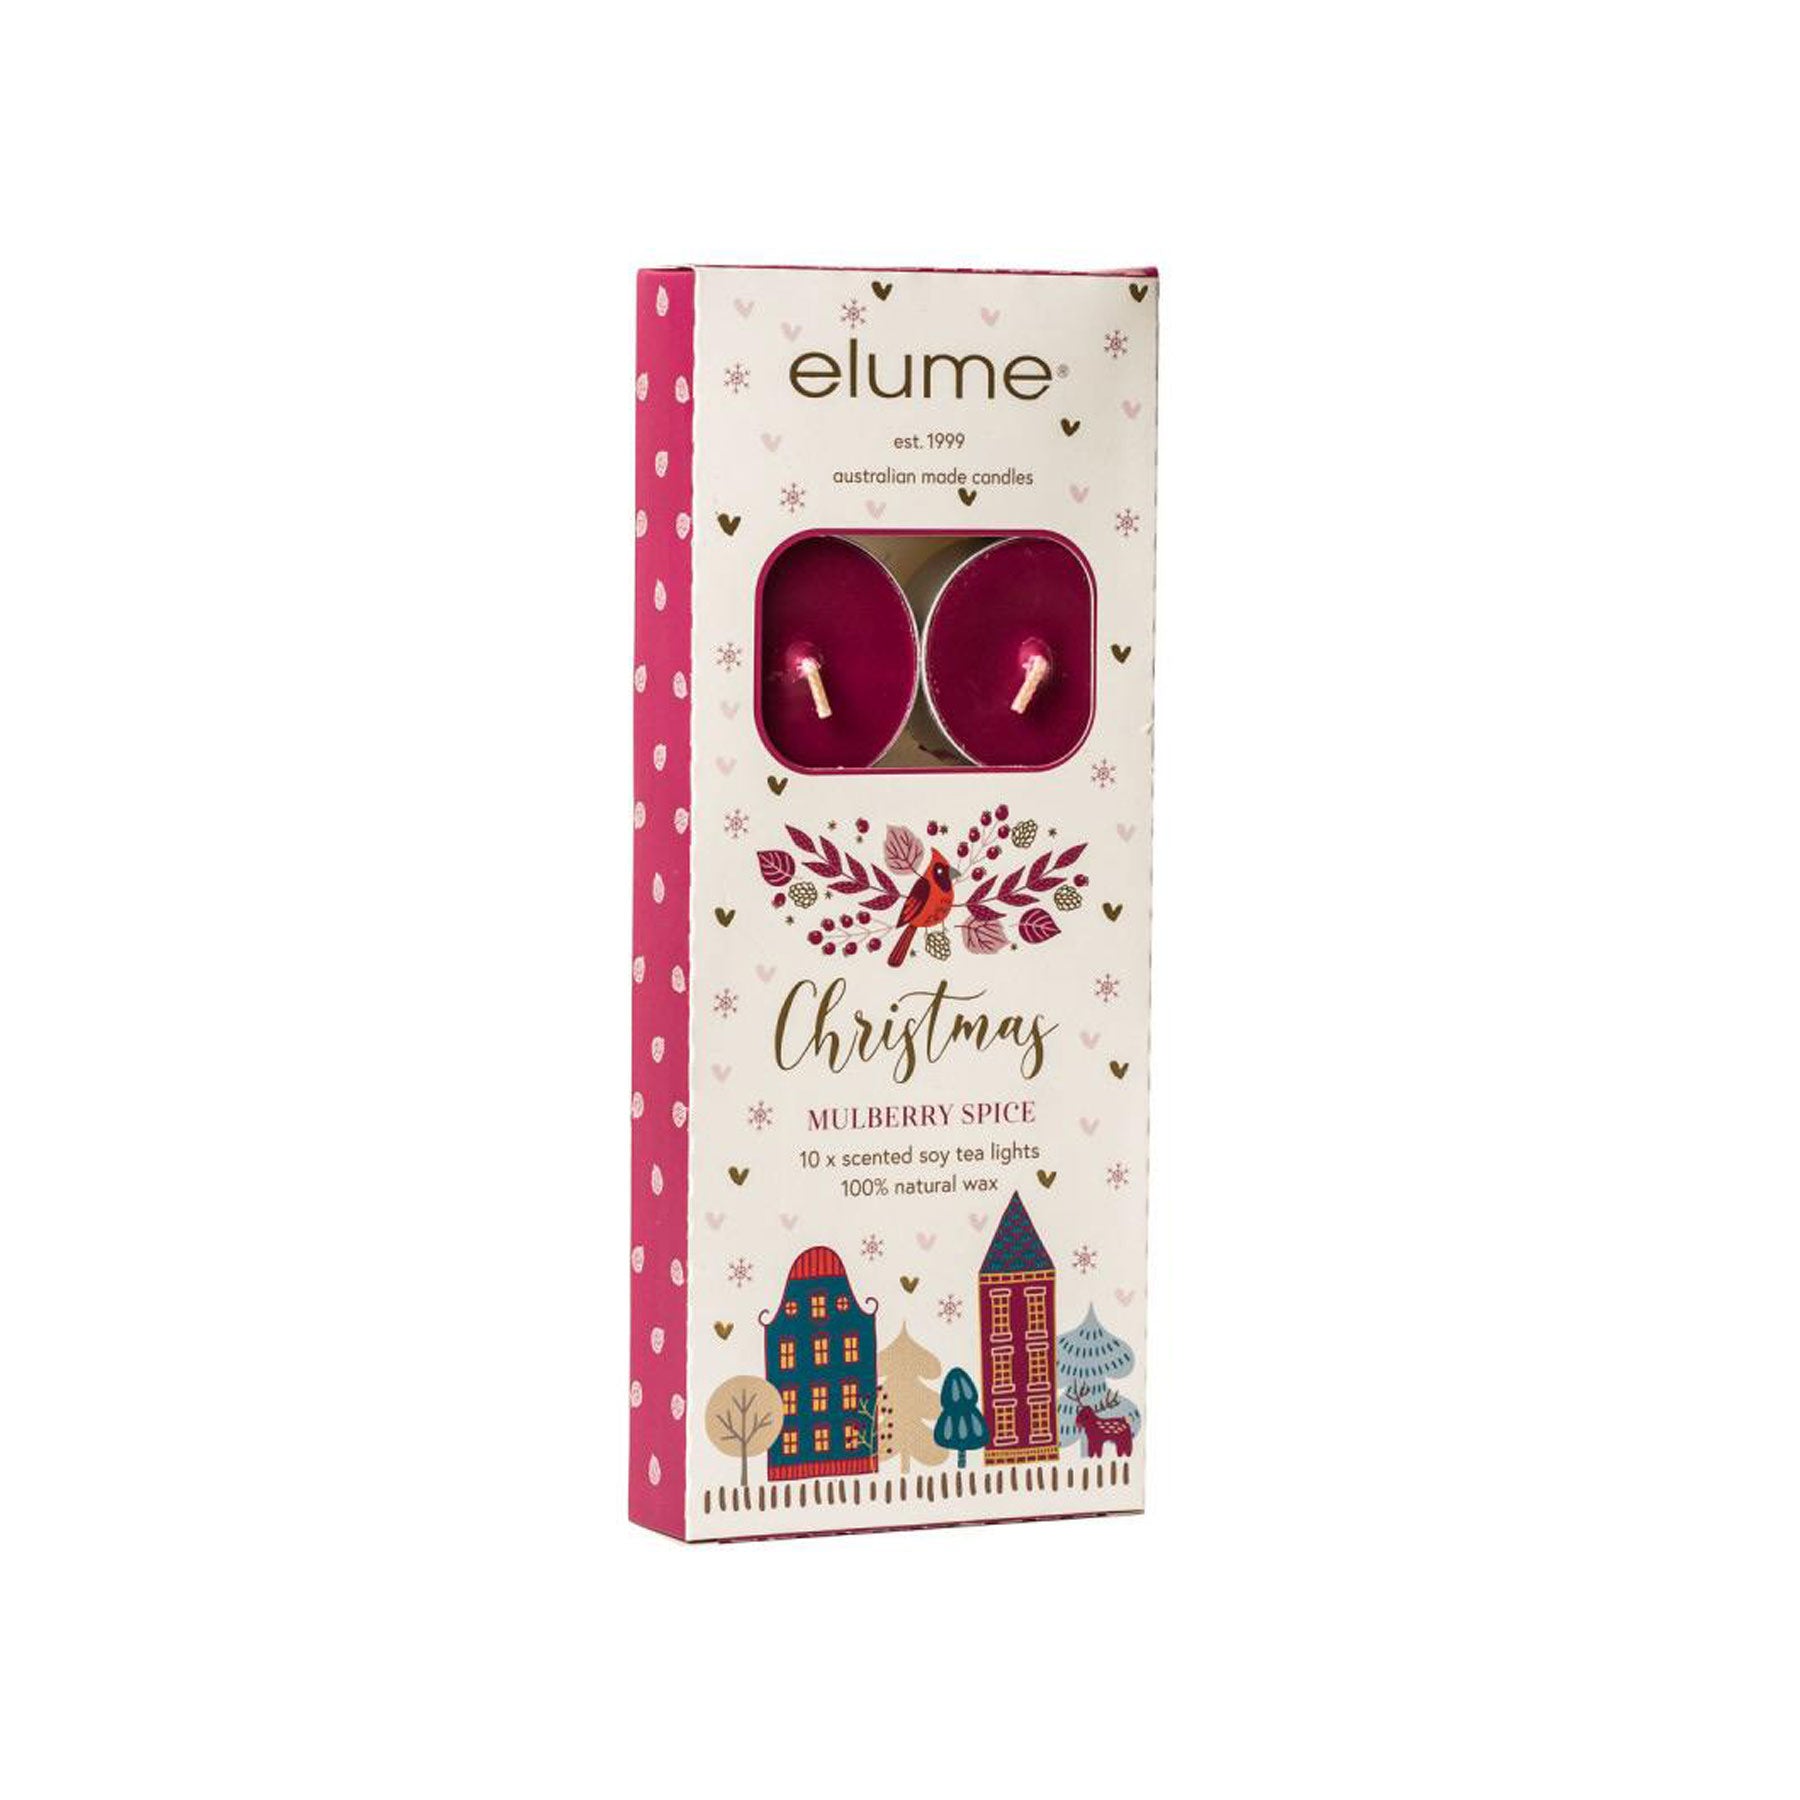 Christmas Mulberry Spice Tealights